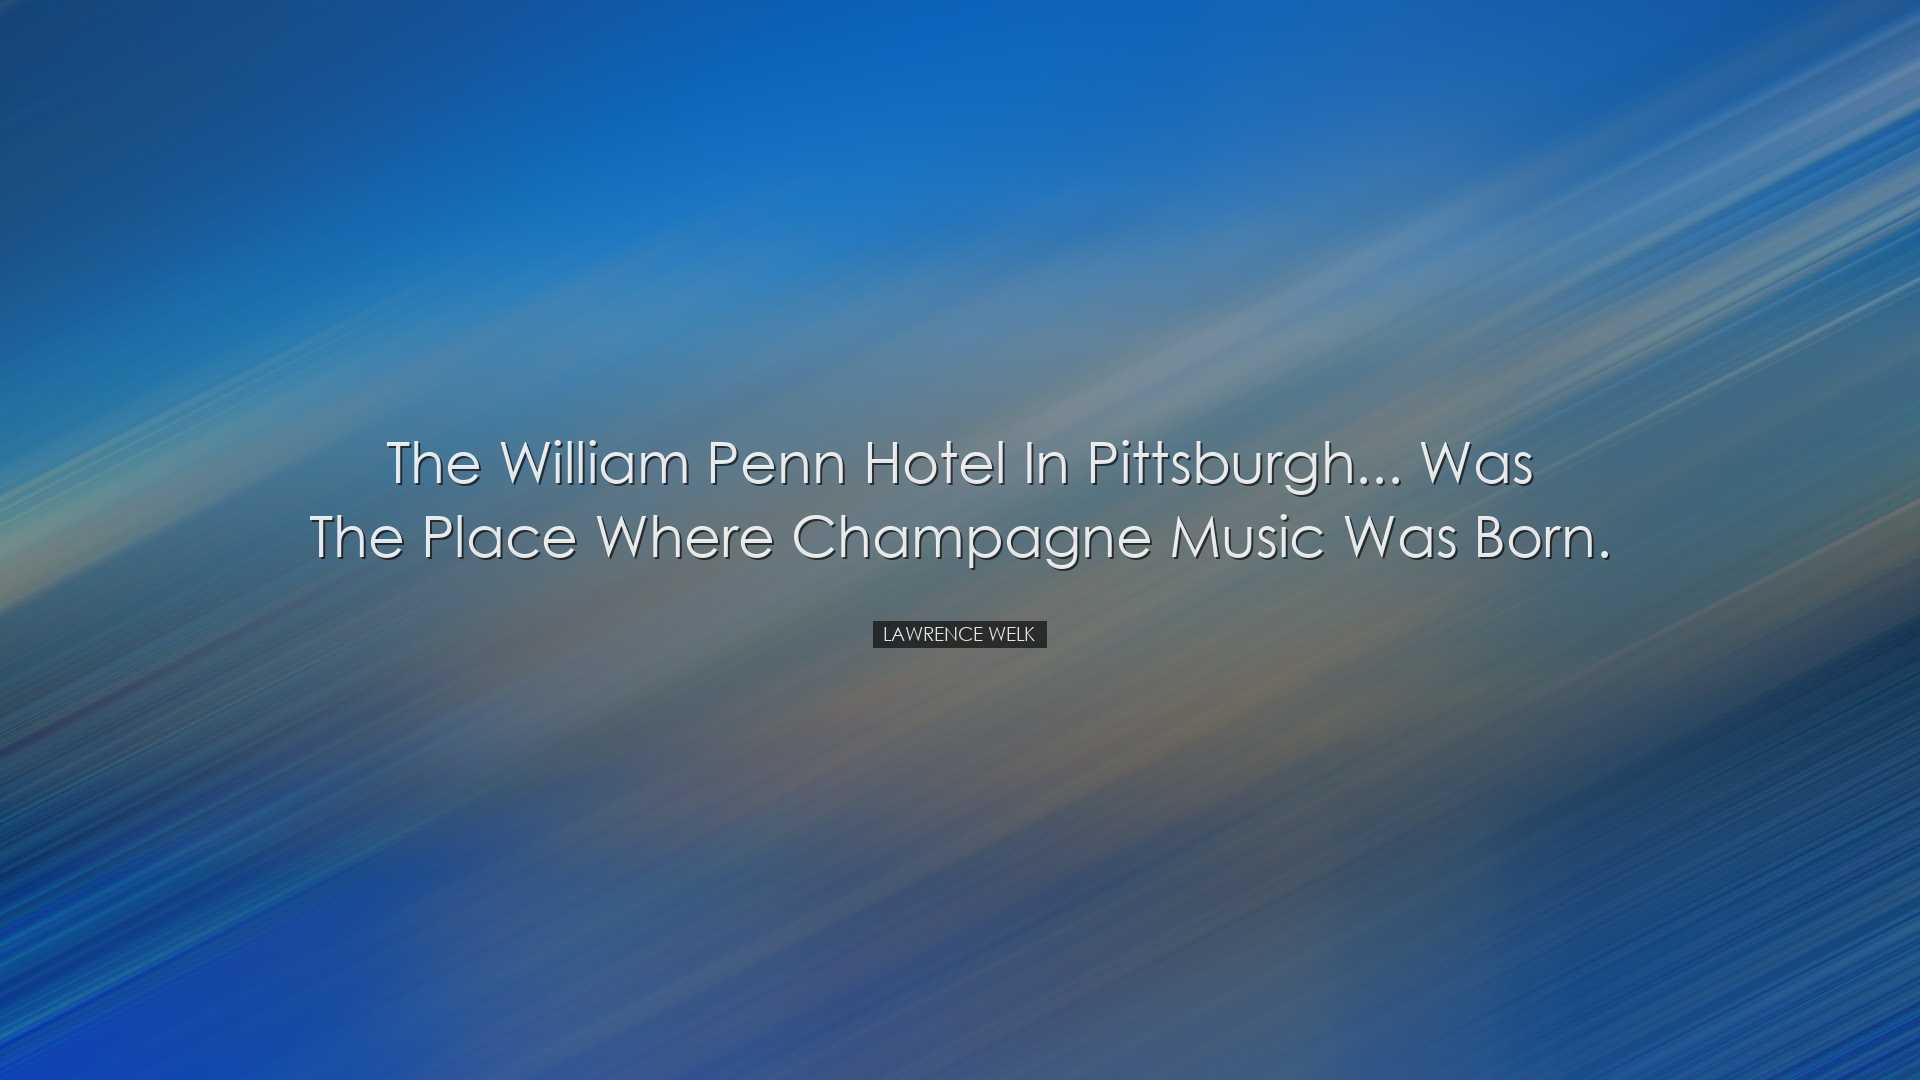 The William Penn Hotel in Pittsburgh... was the place where Champa